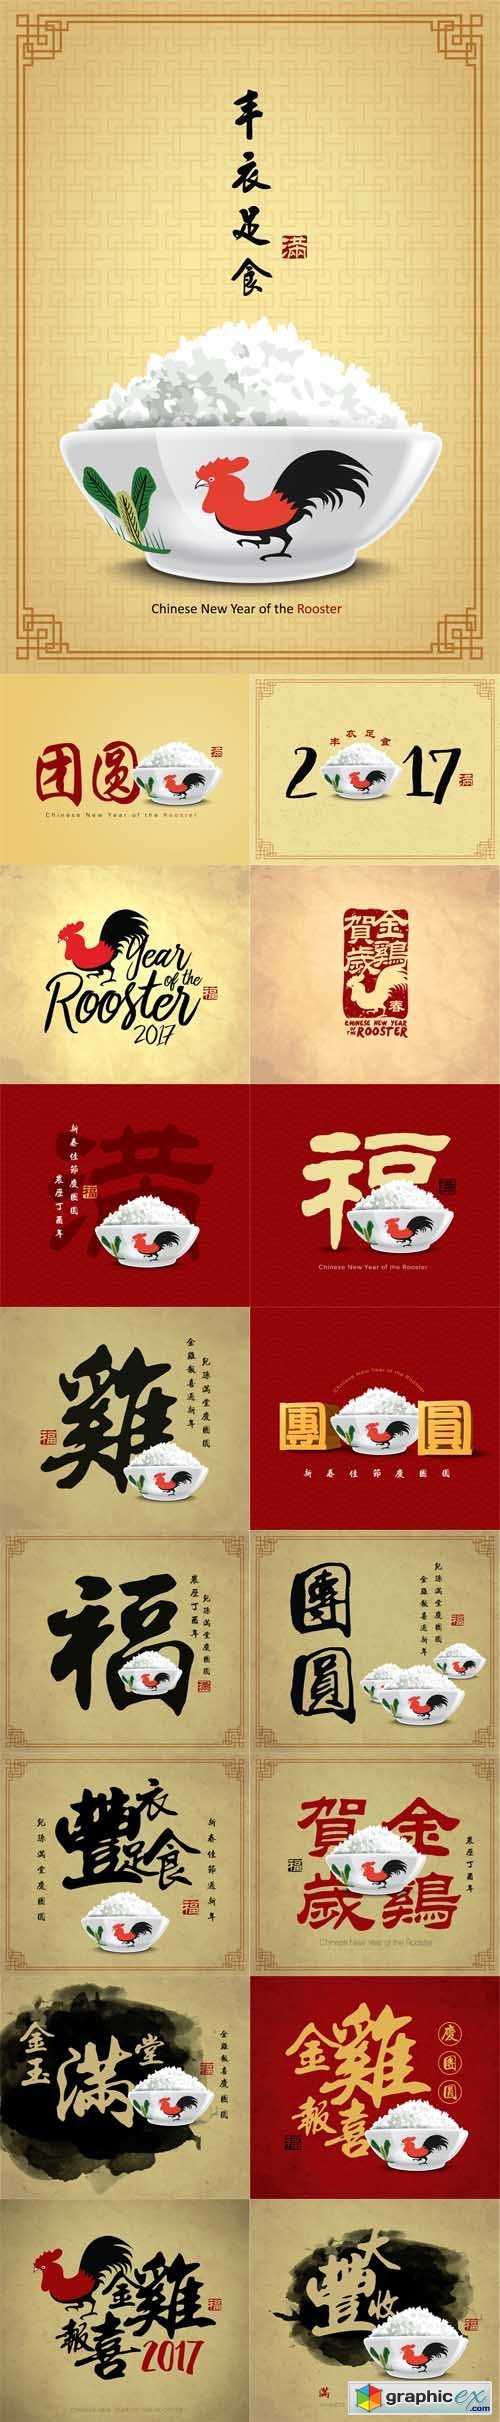 Chinese New Year Card Design with Rooster Bowl, 2017 Year